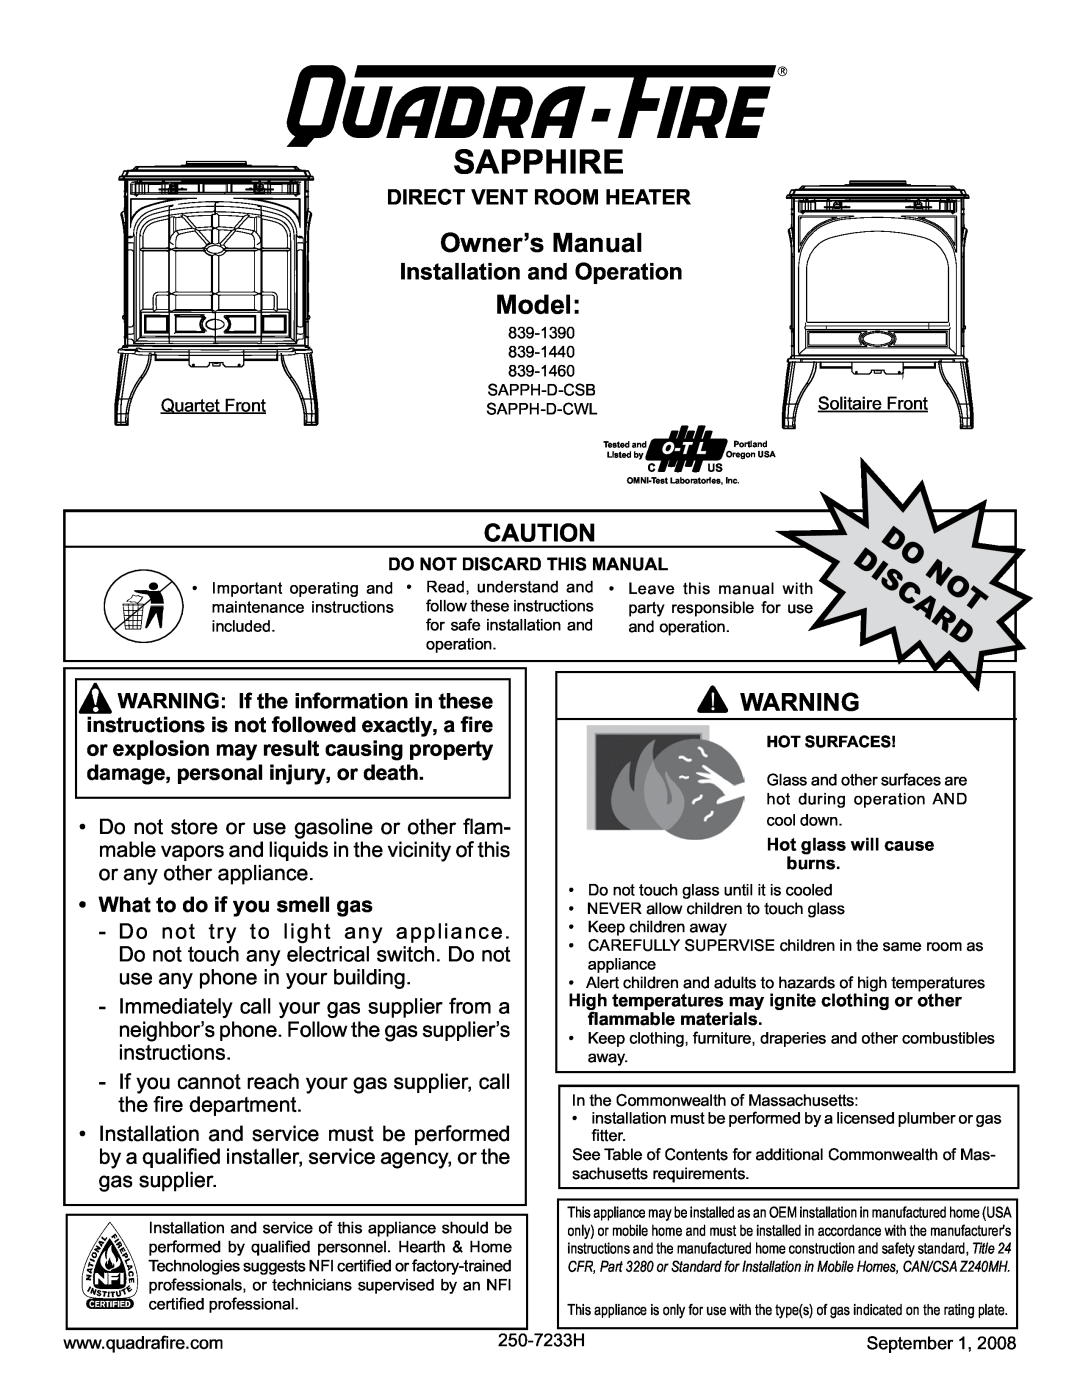 Hearth and Home Technologies 839-1440 owner manual Installation and Operation, What to do if you smell gas, Sapphire 